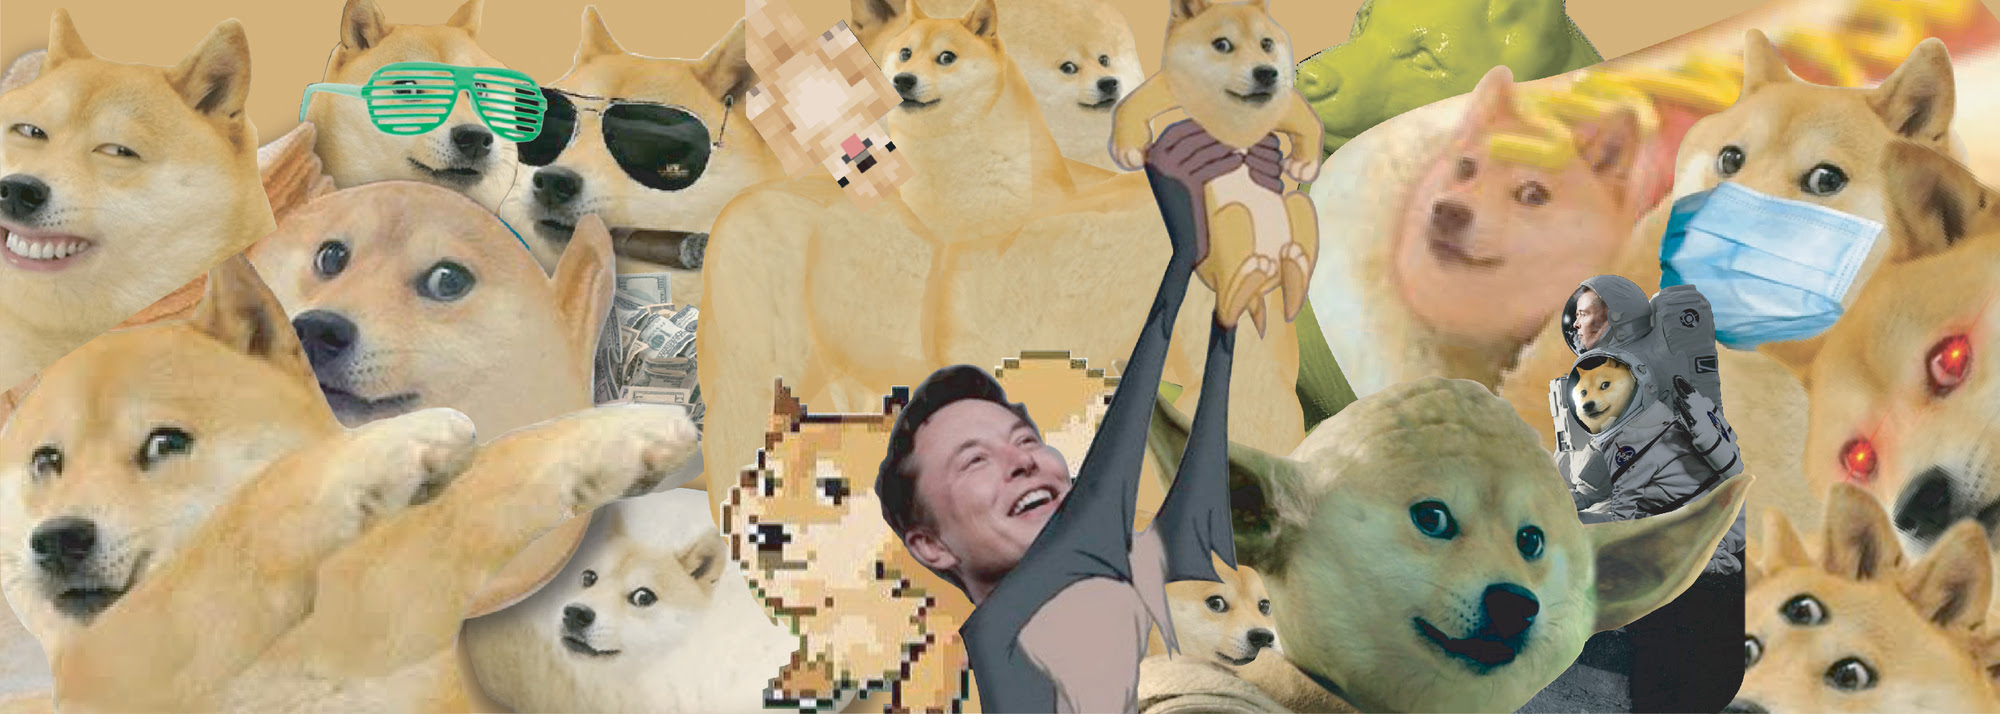 Elon Musk Holding Doge Surrounded by Doge